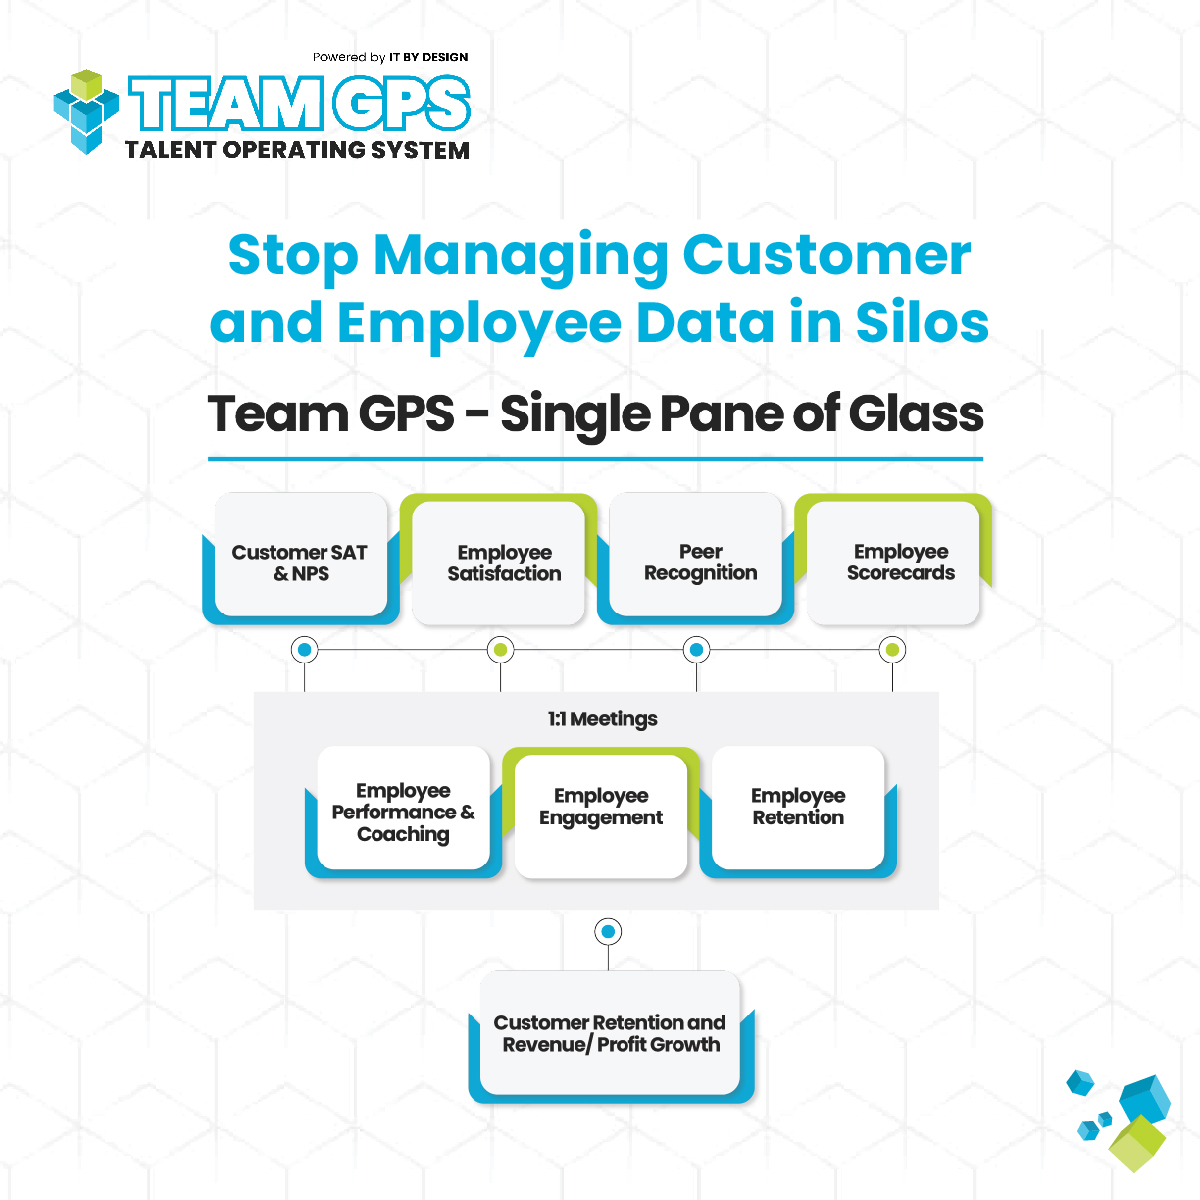 Turn to Team GPS that offers a unified platform for employee and customer data, fostering informed decisions and strategic alignment. Let's drive collective success together!
hubs.ly/Q02tHY310
#TeamGPS #PeopleManagement #PerformanceManagement #Goals #EmployeeEngagement